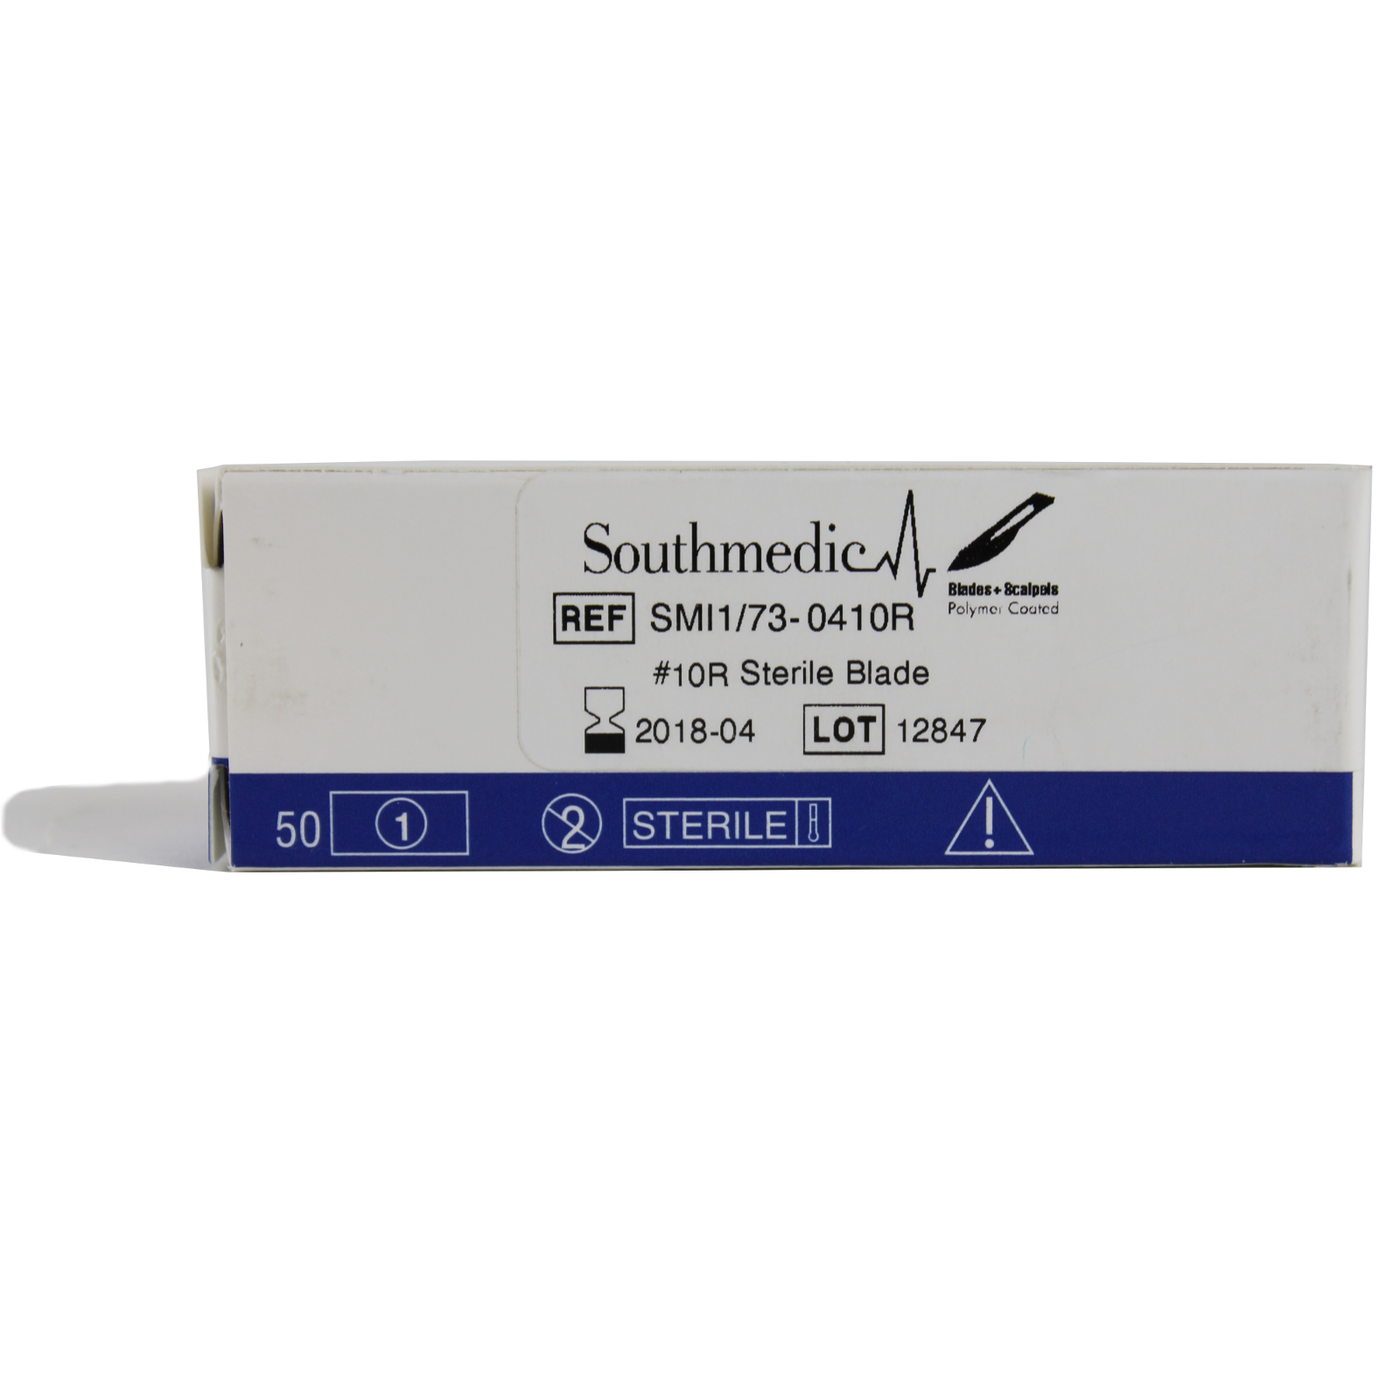 Southmedic Polymer Coated Dermaplaning Blades #10R, Box of 50